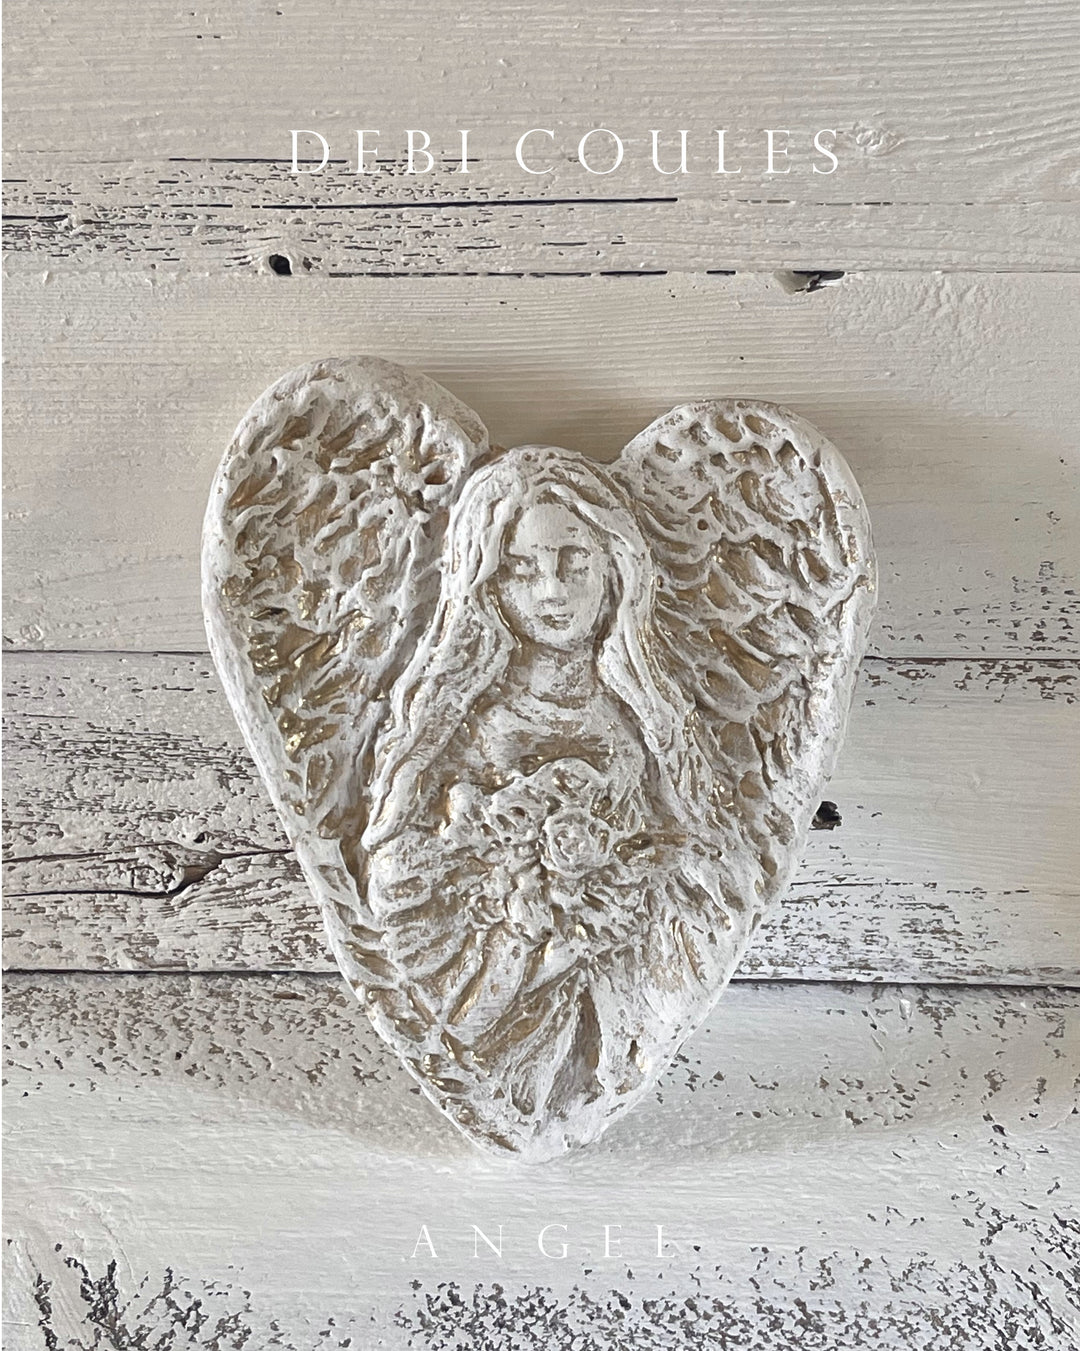 Hand carved gold  angel heart by debi coules, white with gold accents. material: plaster paris reproduction